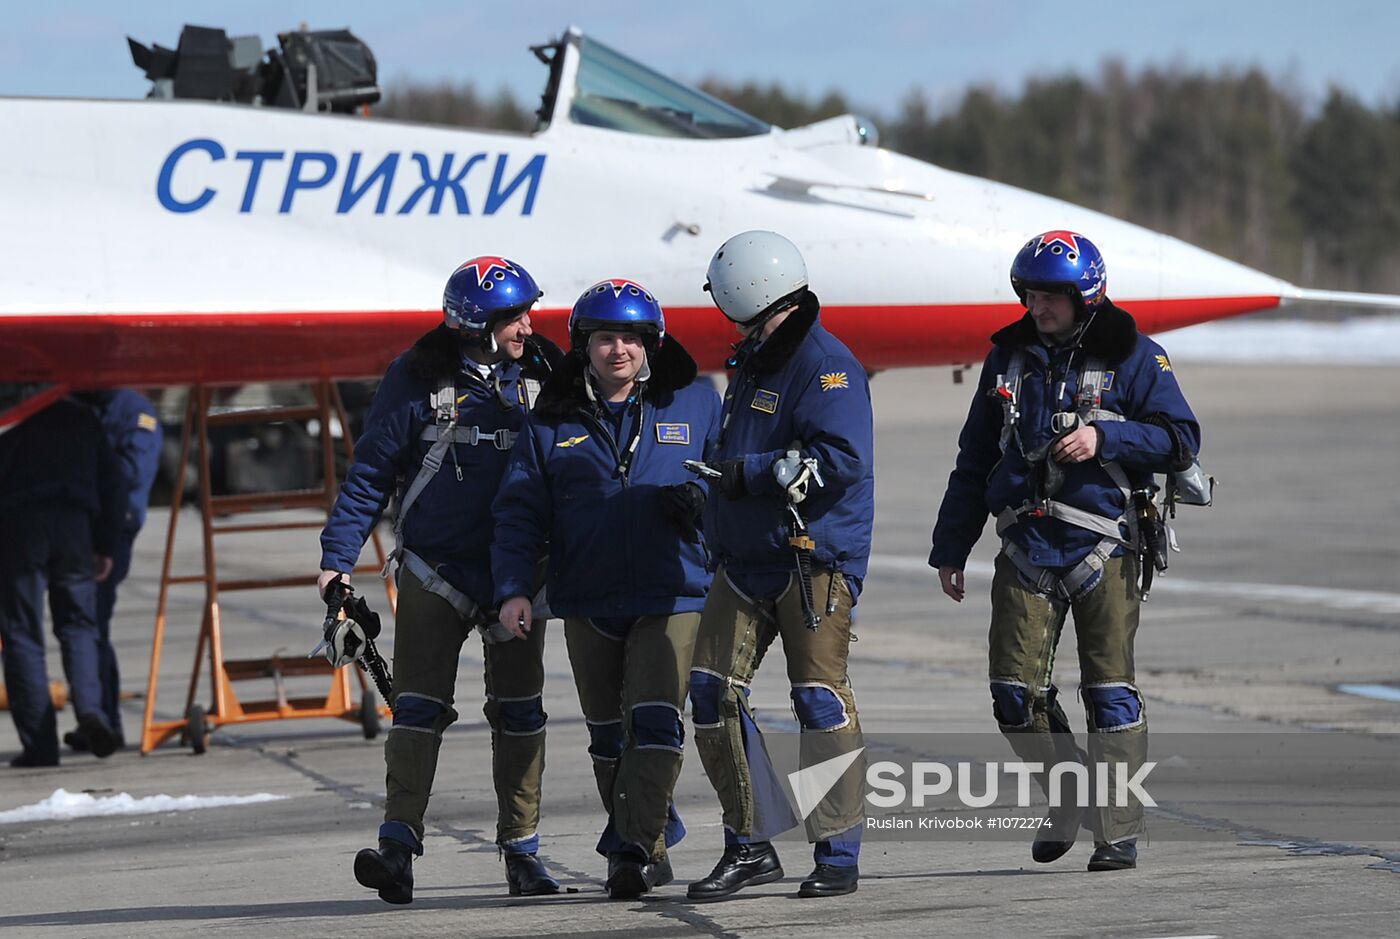 Russian Knights and Strizhi pilot groups